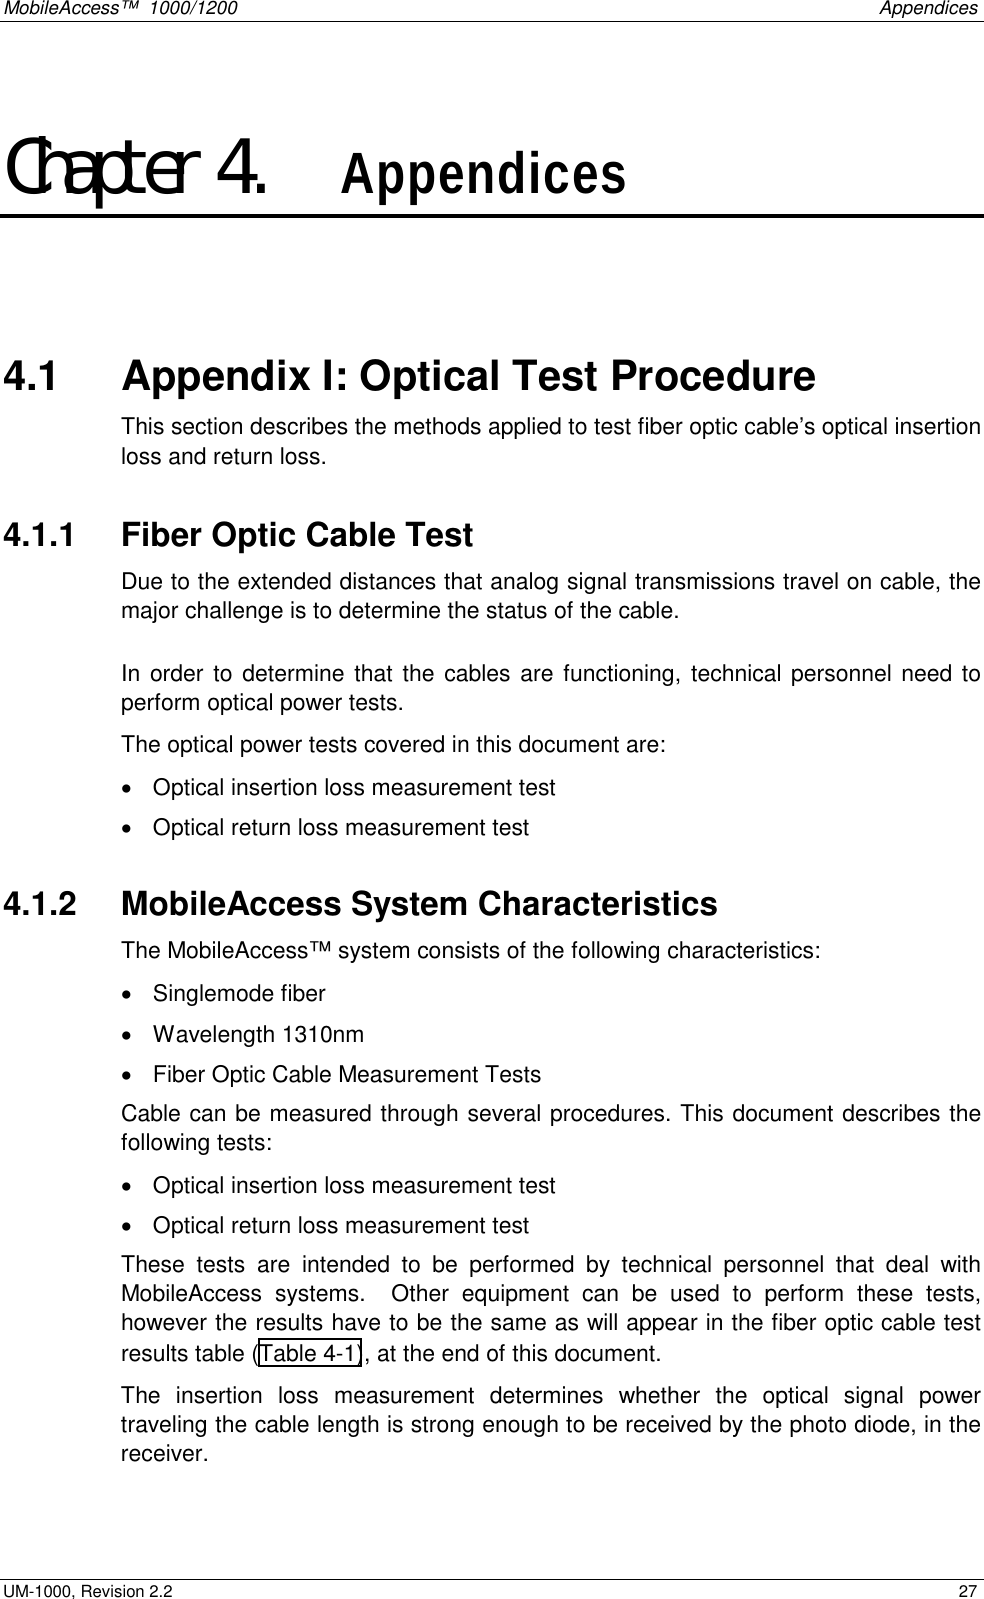 MobileAccess™  1000/1200    Appendices  UM-1000, Revision 2.2    27 Chapter 4.    Appendices  4.1   Appendix I: Optical Test Procedure This section describes the methods applied to test fiber optic cable’s optical insertion loss and return loss. 4.1.1   Fiber Optic Cable Test Due to the extended distances that analog signal transmissions travel on cable, the major challenge is to determine the status of the cable.  In order to determine that the cables are functioning, technical personnel need to perform optical power tests. The optical power tests covered in this document are: •  Optical insertion loss measurement test •  Optical return loss measurement test 4.1.2   MobileAccess System Characteristics The MobileAccess™ system consists of the following characteristics: •  Singlemode fiber •  Wavelength 1310nm •  Fiber Optic Cable Measurement Tests Cable can be measured through several procedures. This document describes the following tests: •  Optical insertion loss measurement test  •  Optical return loss measurement test These tests are intended to be performed by technical personnel that deal with MobileAccess systems.  Other equipment can be used to perform these tests, however the results have to be the same as will appear in the fiber optic cable test results table (Table  4-1), at the end of this document.  The insertion loss measurement determines whether the optical signal power traveling the cable length is strong enough to be received by the photo diode, in the receiver. 